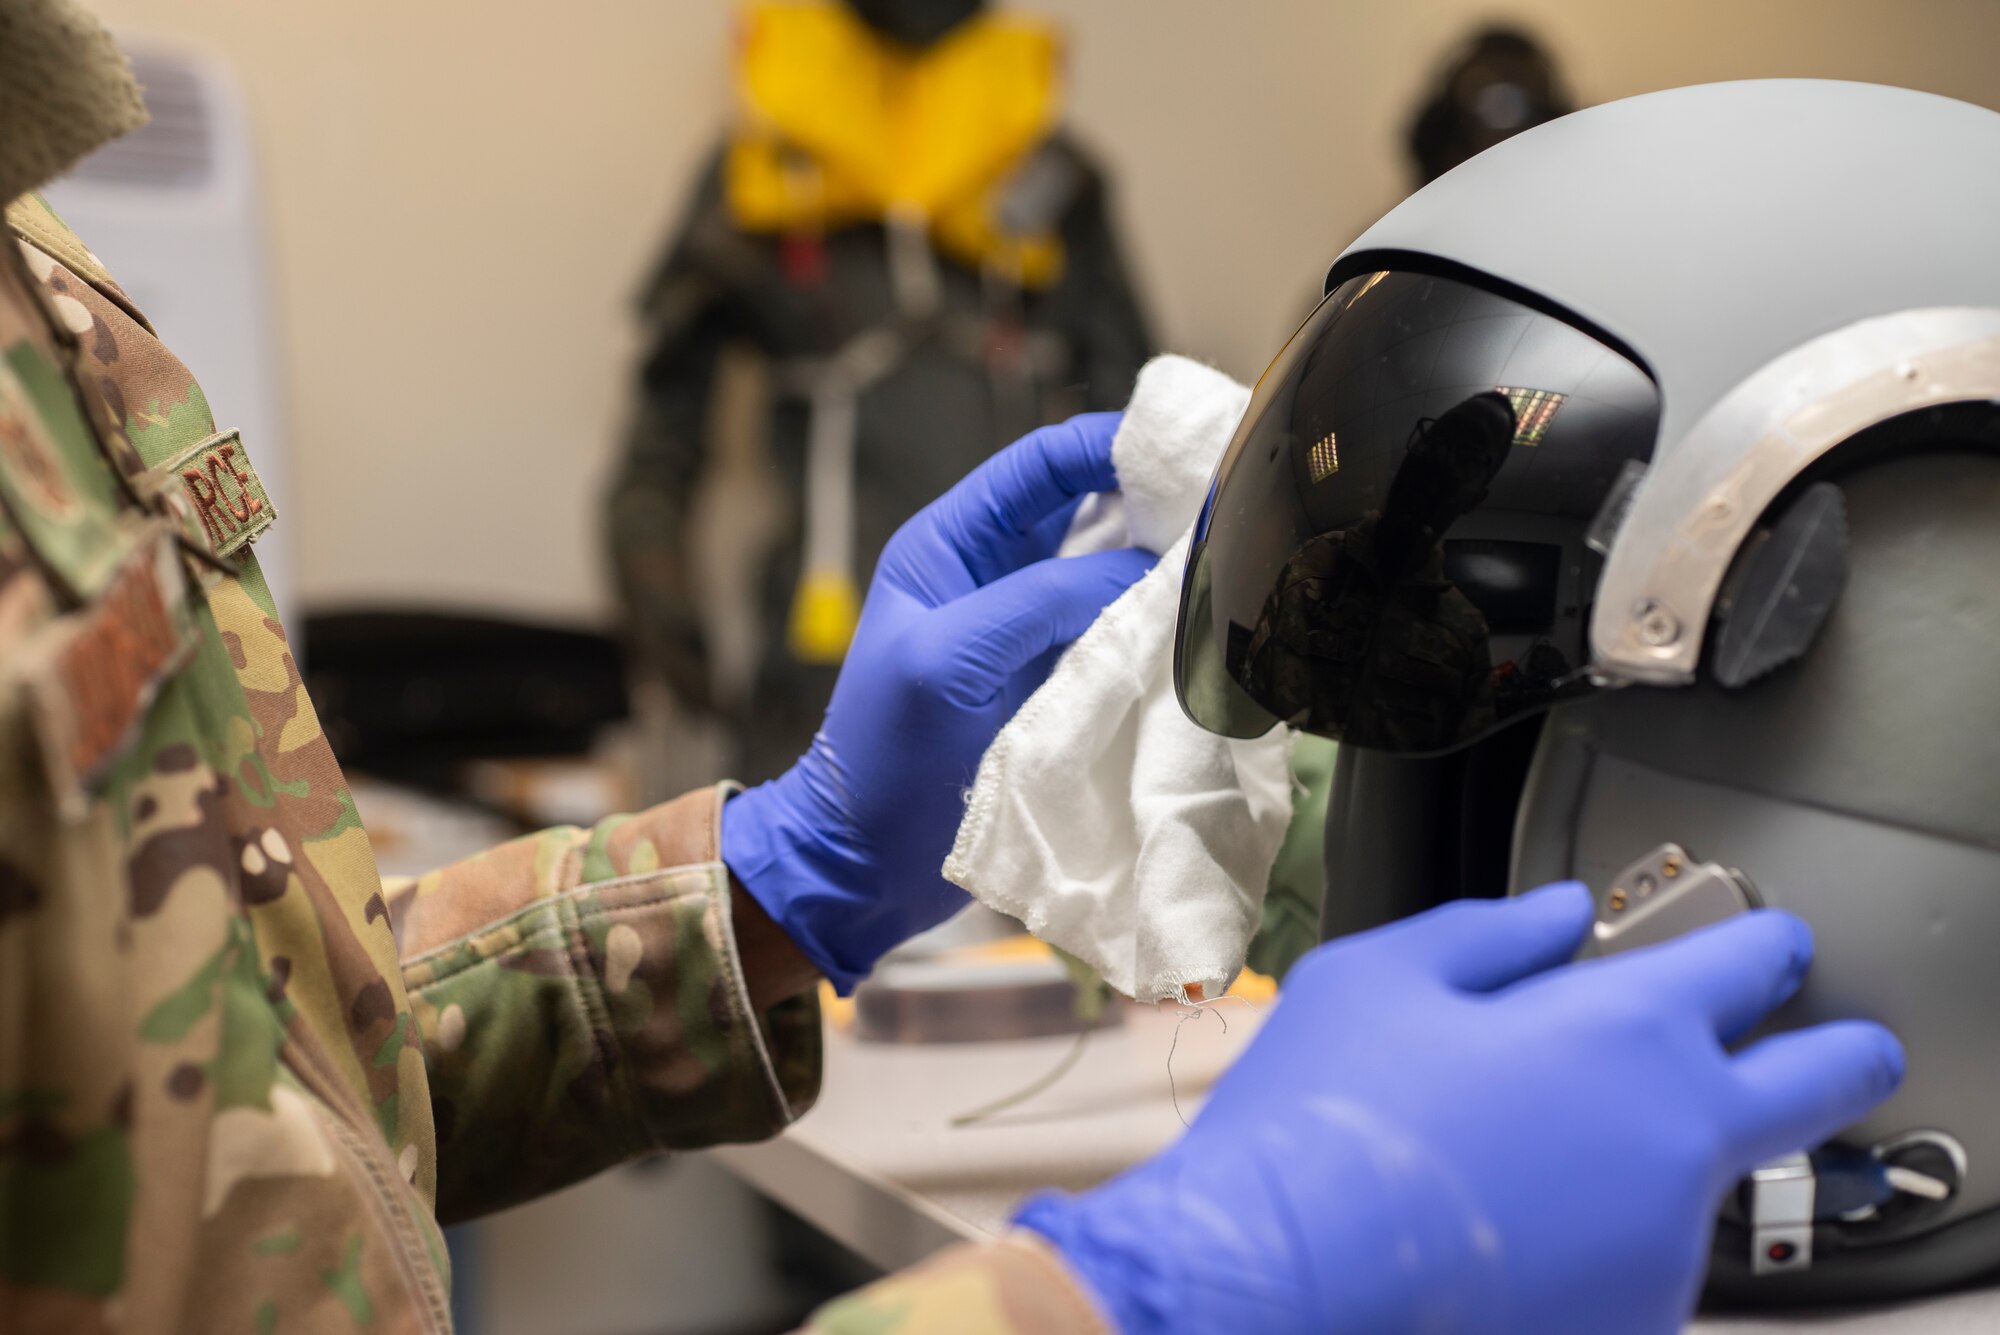 Tech. Sgt. Alexander Johnston, 100th Operations Support Squadron aircrew flight equipment lead trainer, cleans a helmet visor at RAF Mildenhall, England, Dec. 3, 2019. The AFE shop maintains and inspects equipment such as flight helmets, oxygen masks, survival gear and radios that help pilots and other aircrew complete the mission. (U.S. Air Force photo by Airman 1st Class Joseph Barron)